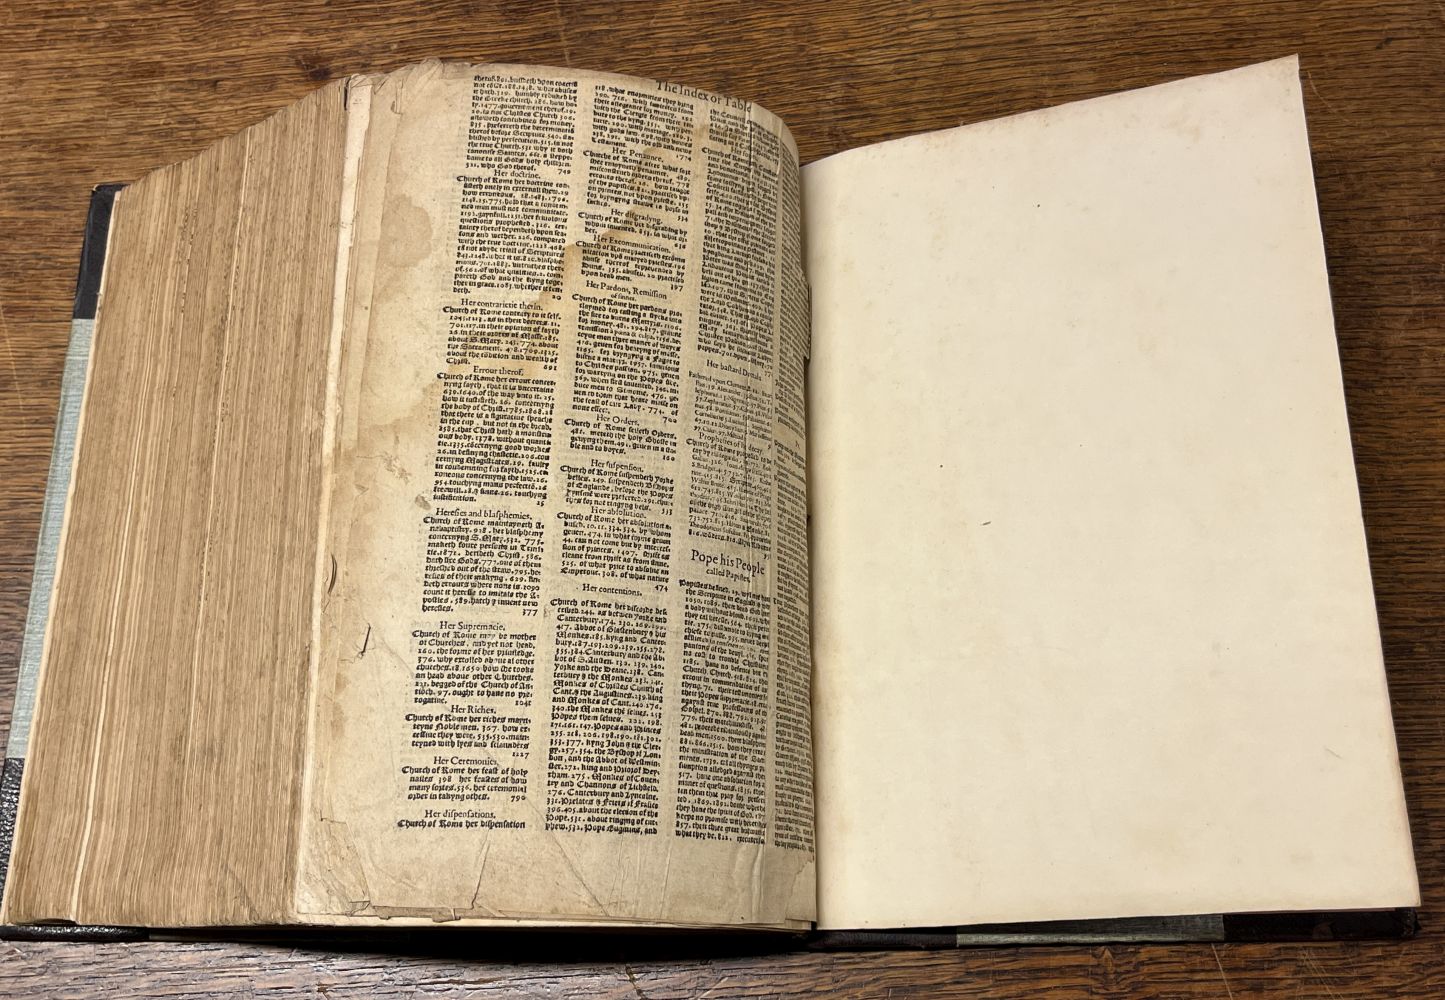 Foxe, John, Book of Martyrs, 2 volumes in one, 3rd edition, John Daye, 1576 - Image 9 of 9